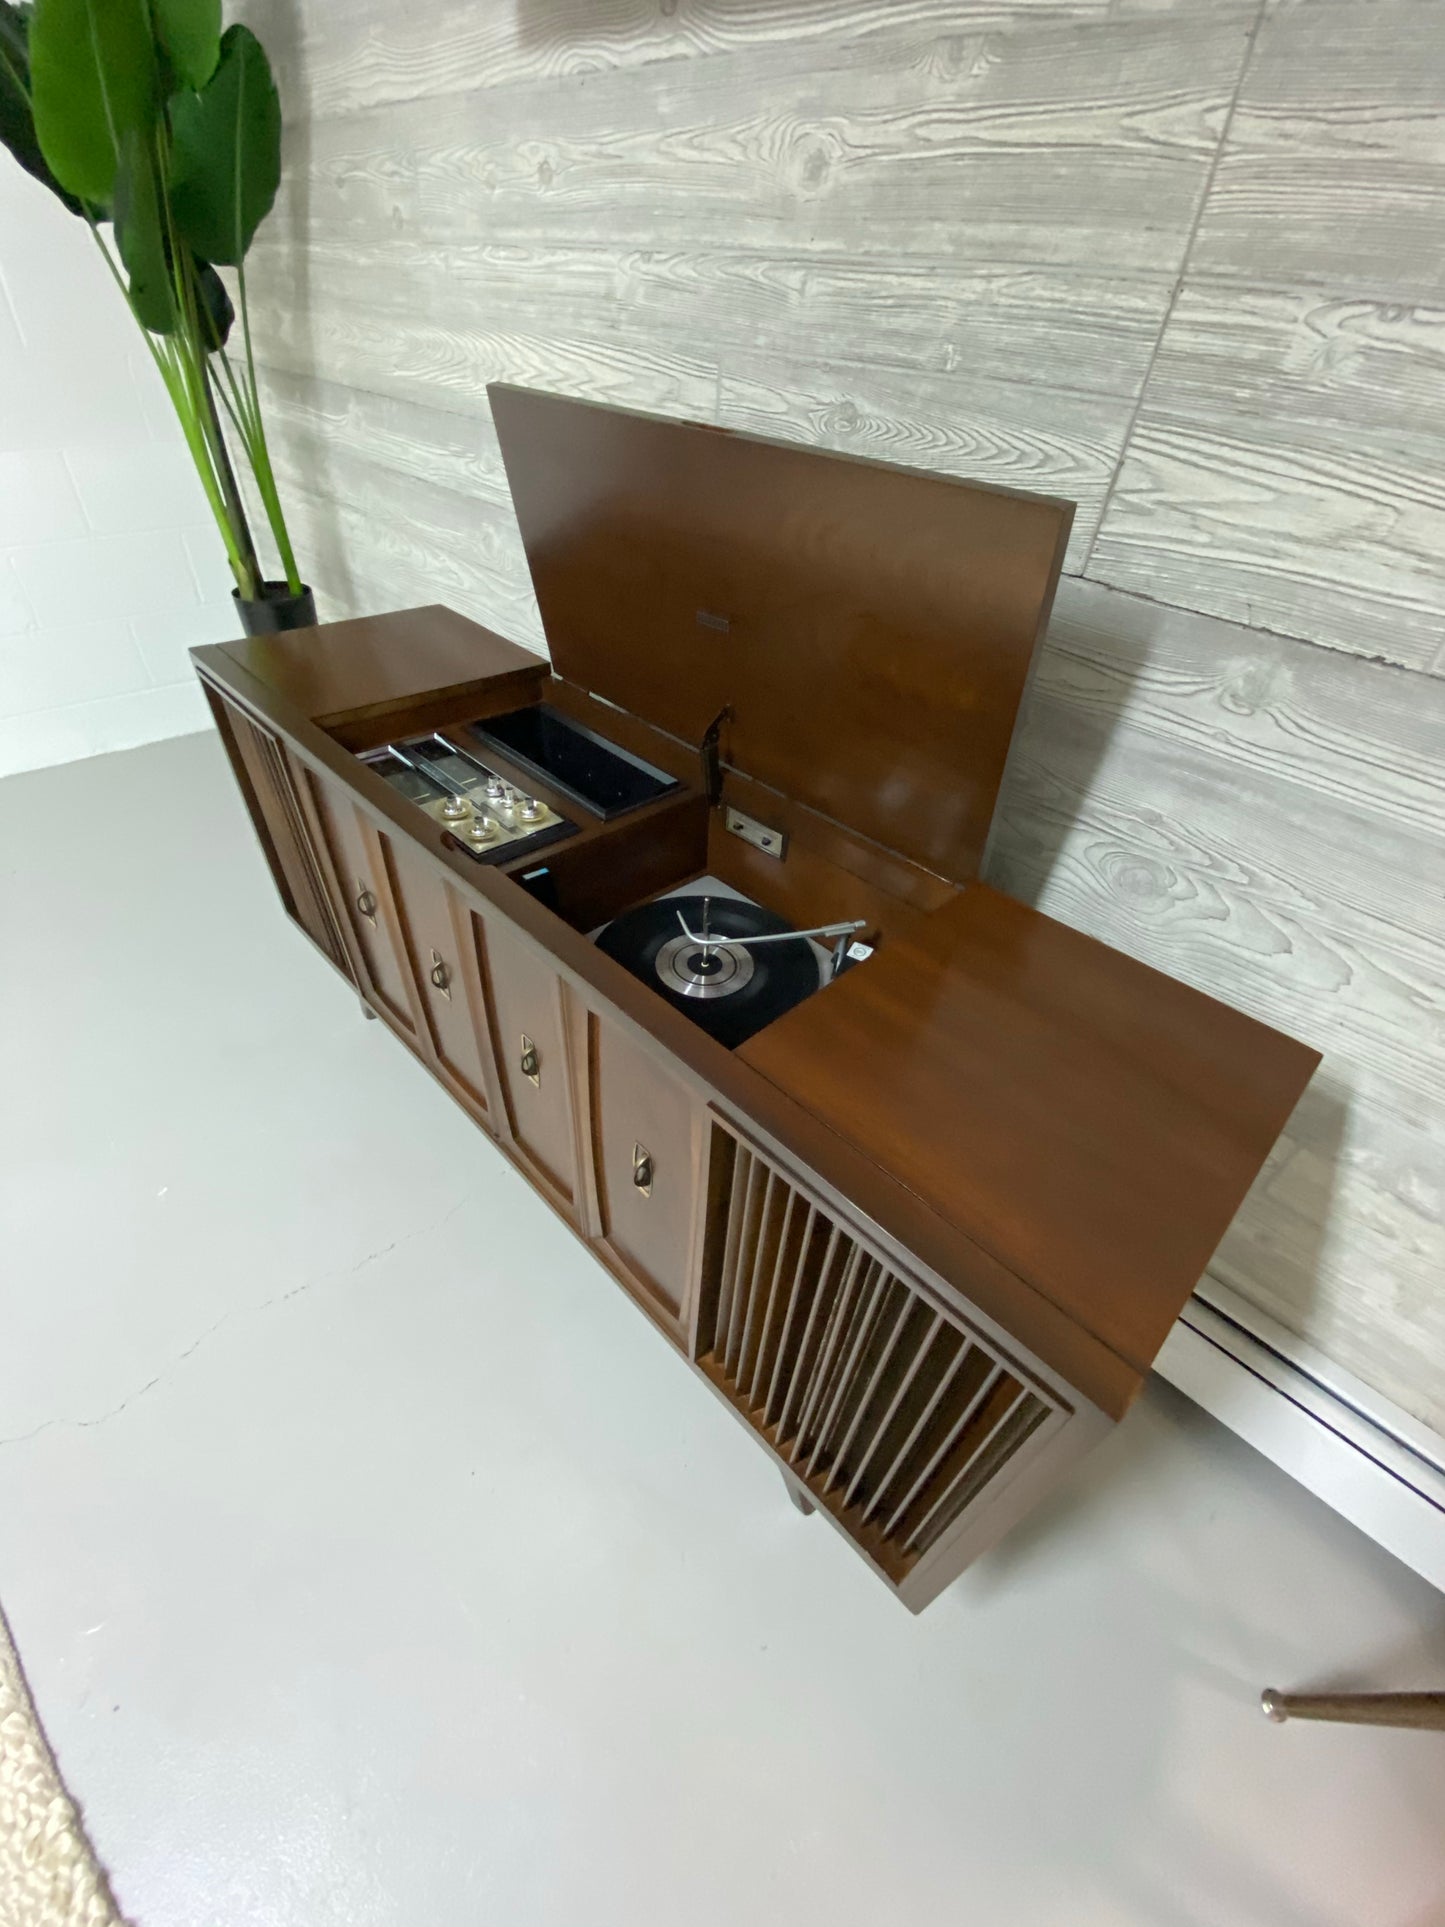 **SOLD OUT** ZENITH Vintage 60s Record Player Changer Stereo Console AM FM Bluetooth Alexa The Vintedge Co.